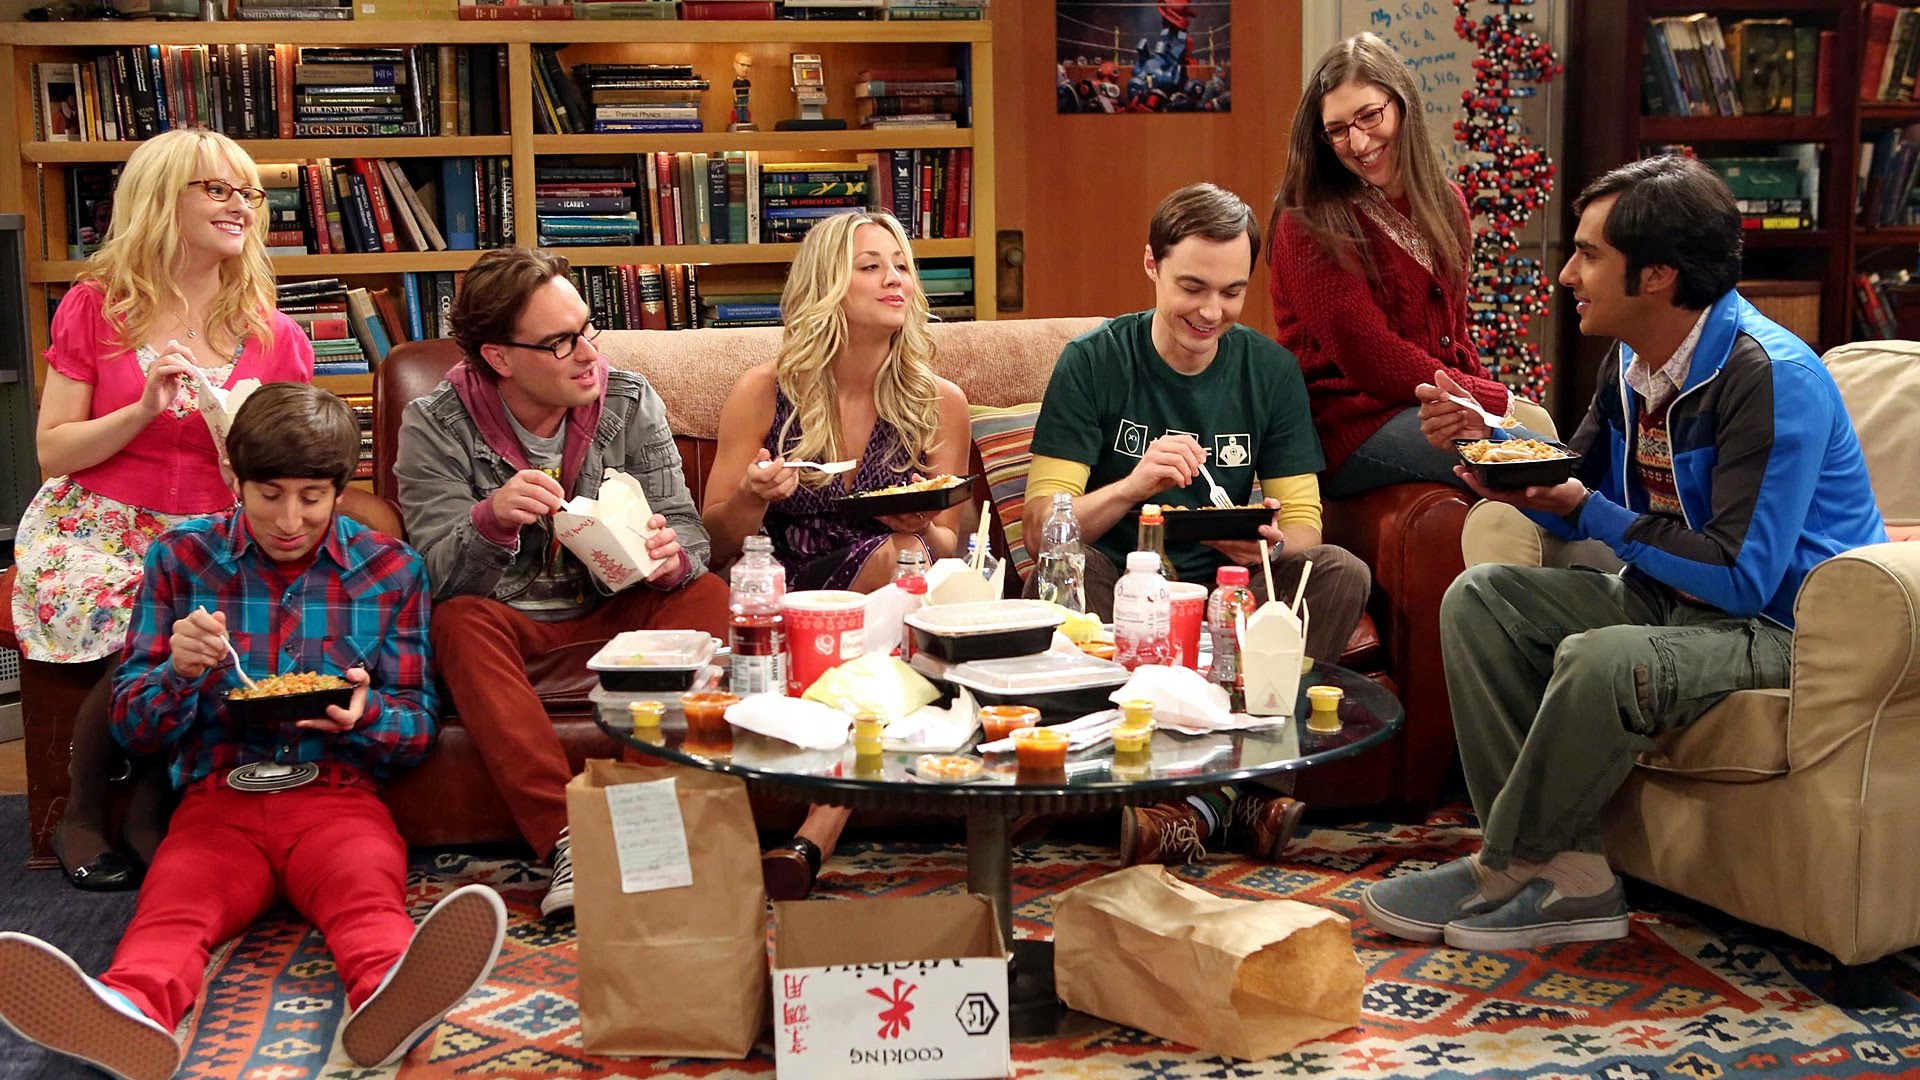 Big Bang Theory By Production Studio Warner Bros Will End In 2019